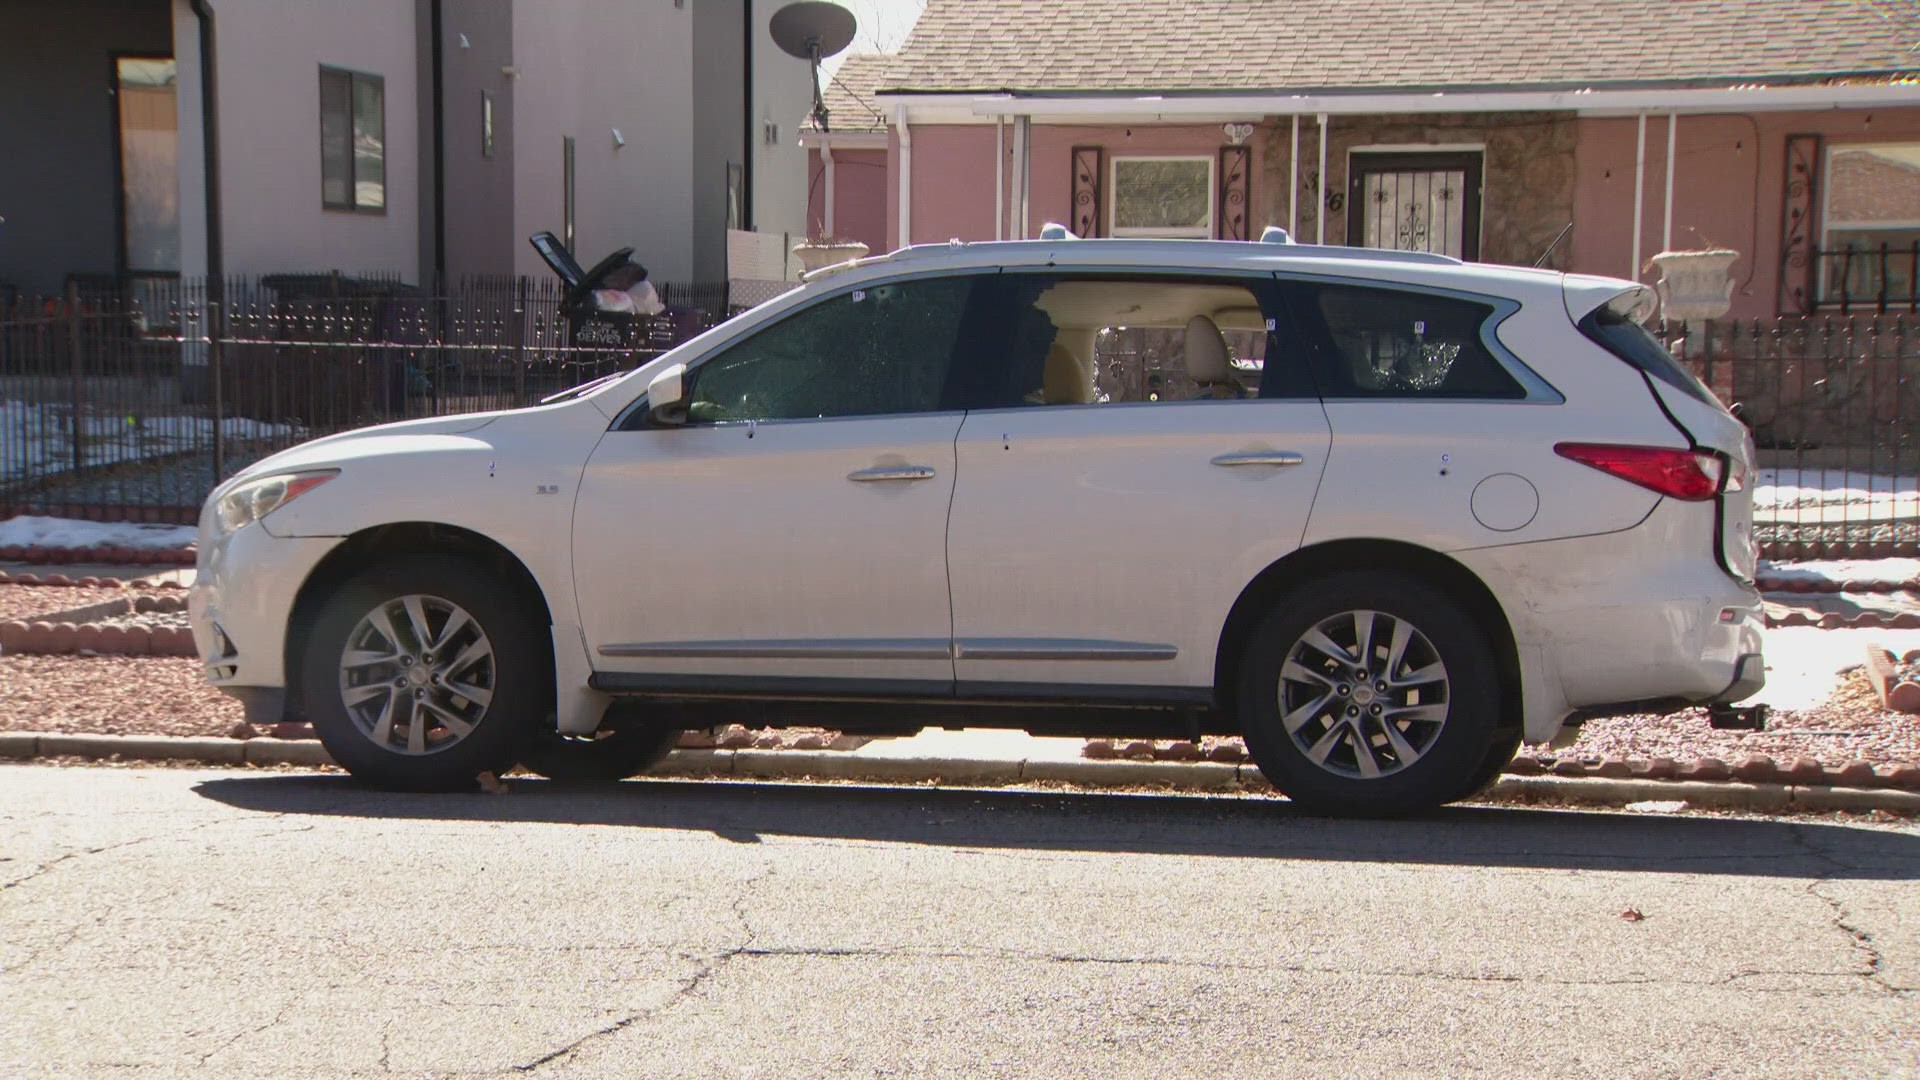 Three drive-by shootings that damaged houses, cars have been reported at 27th and Hazel, near Sloan's Lake, in a month. Denver Police are investigating.